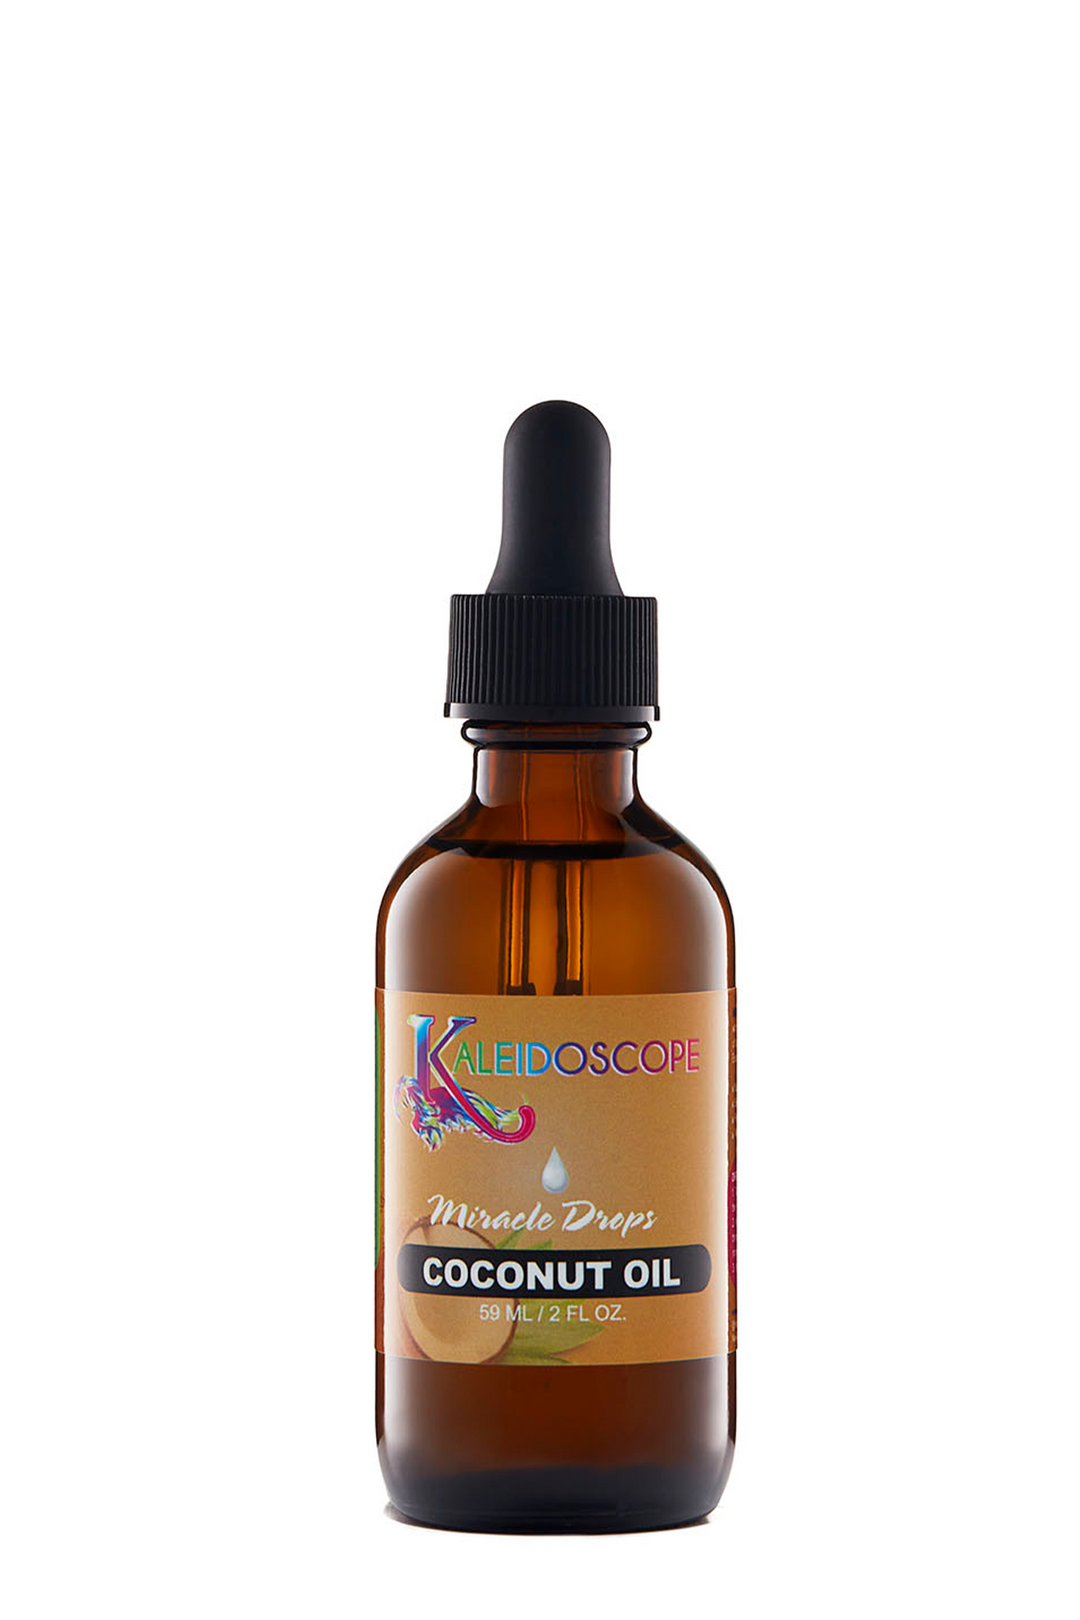 Kaleidoscope Miracle Drops Coconut Oil